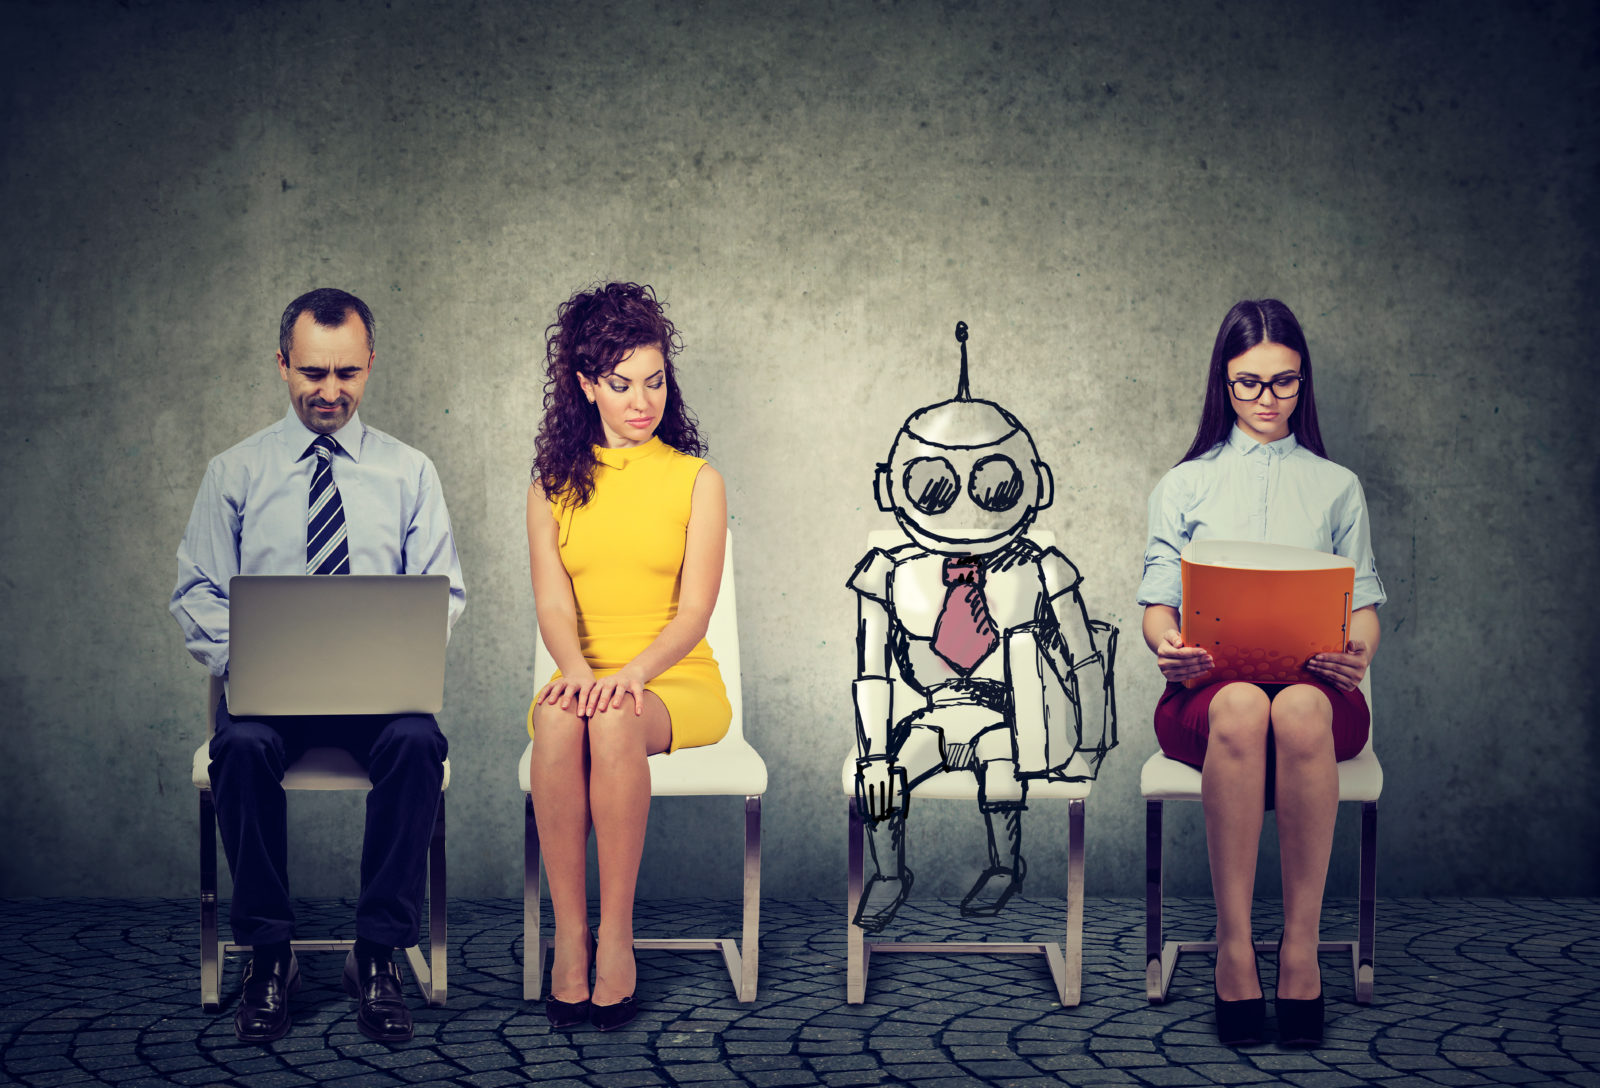 Cartoon robot sitting in line with human applicants for a job interview